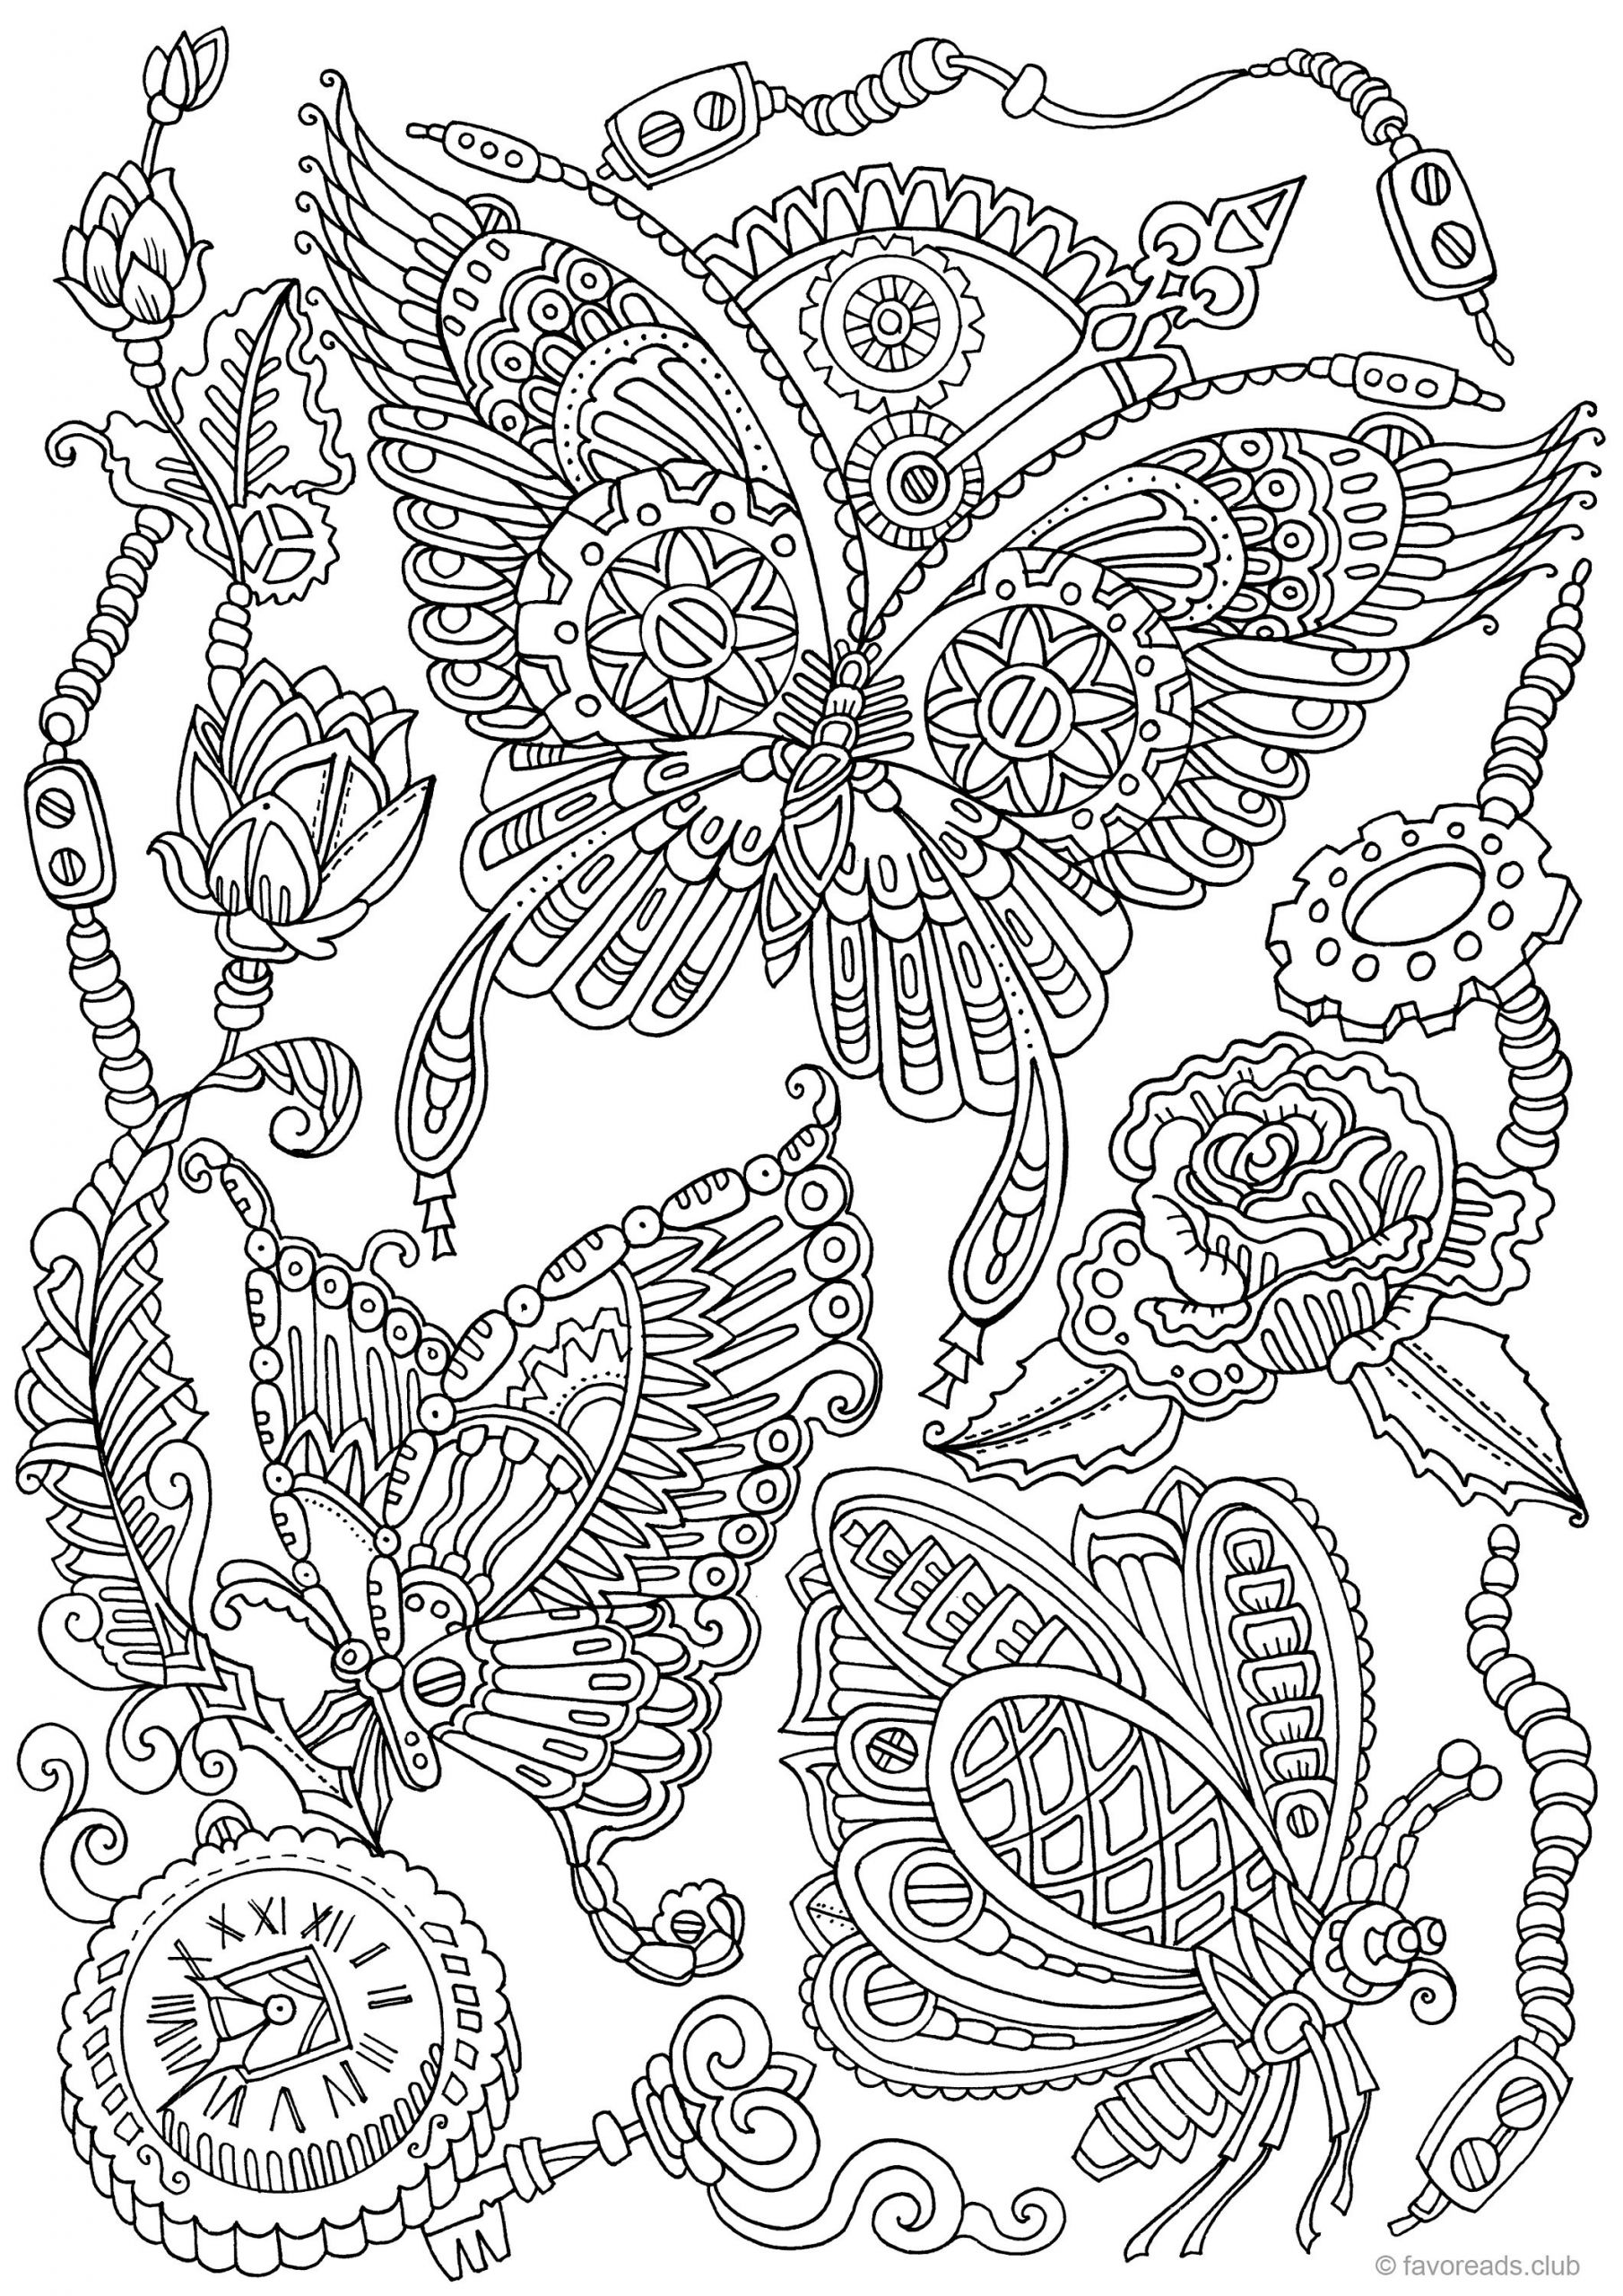 Adult Coloring Book Pages
 Steampunk Butterflies Printable Adult Coloring Page from